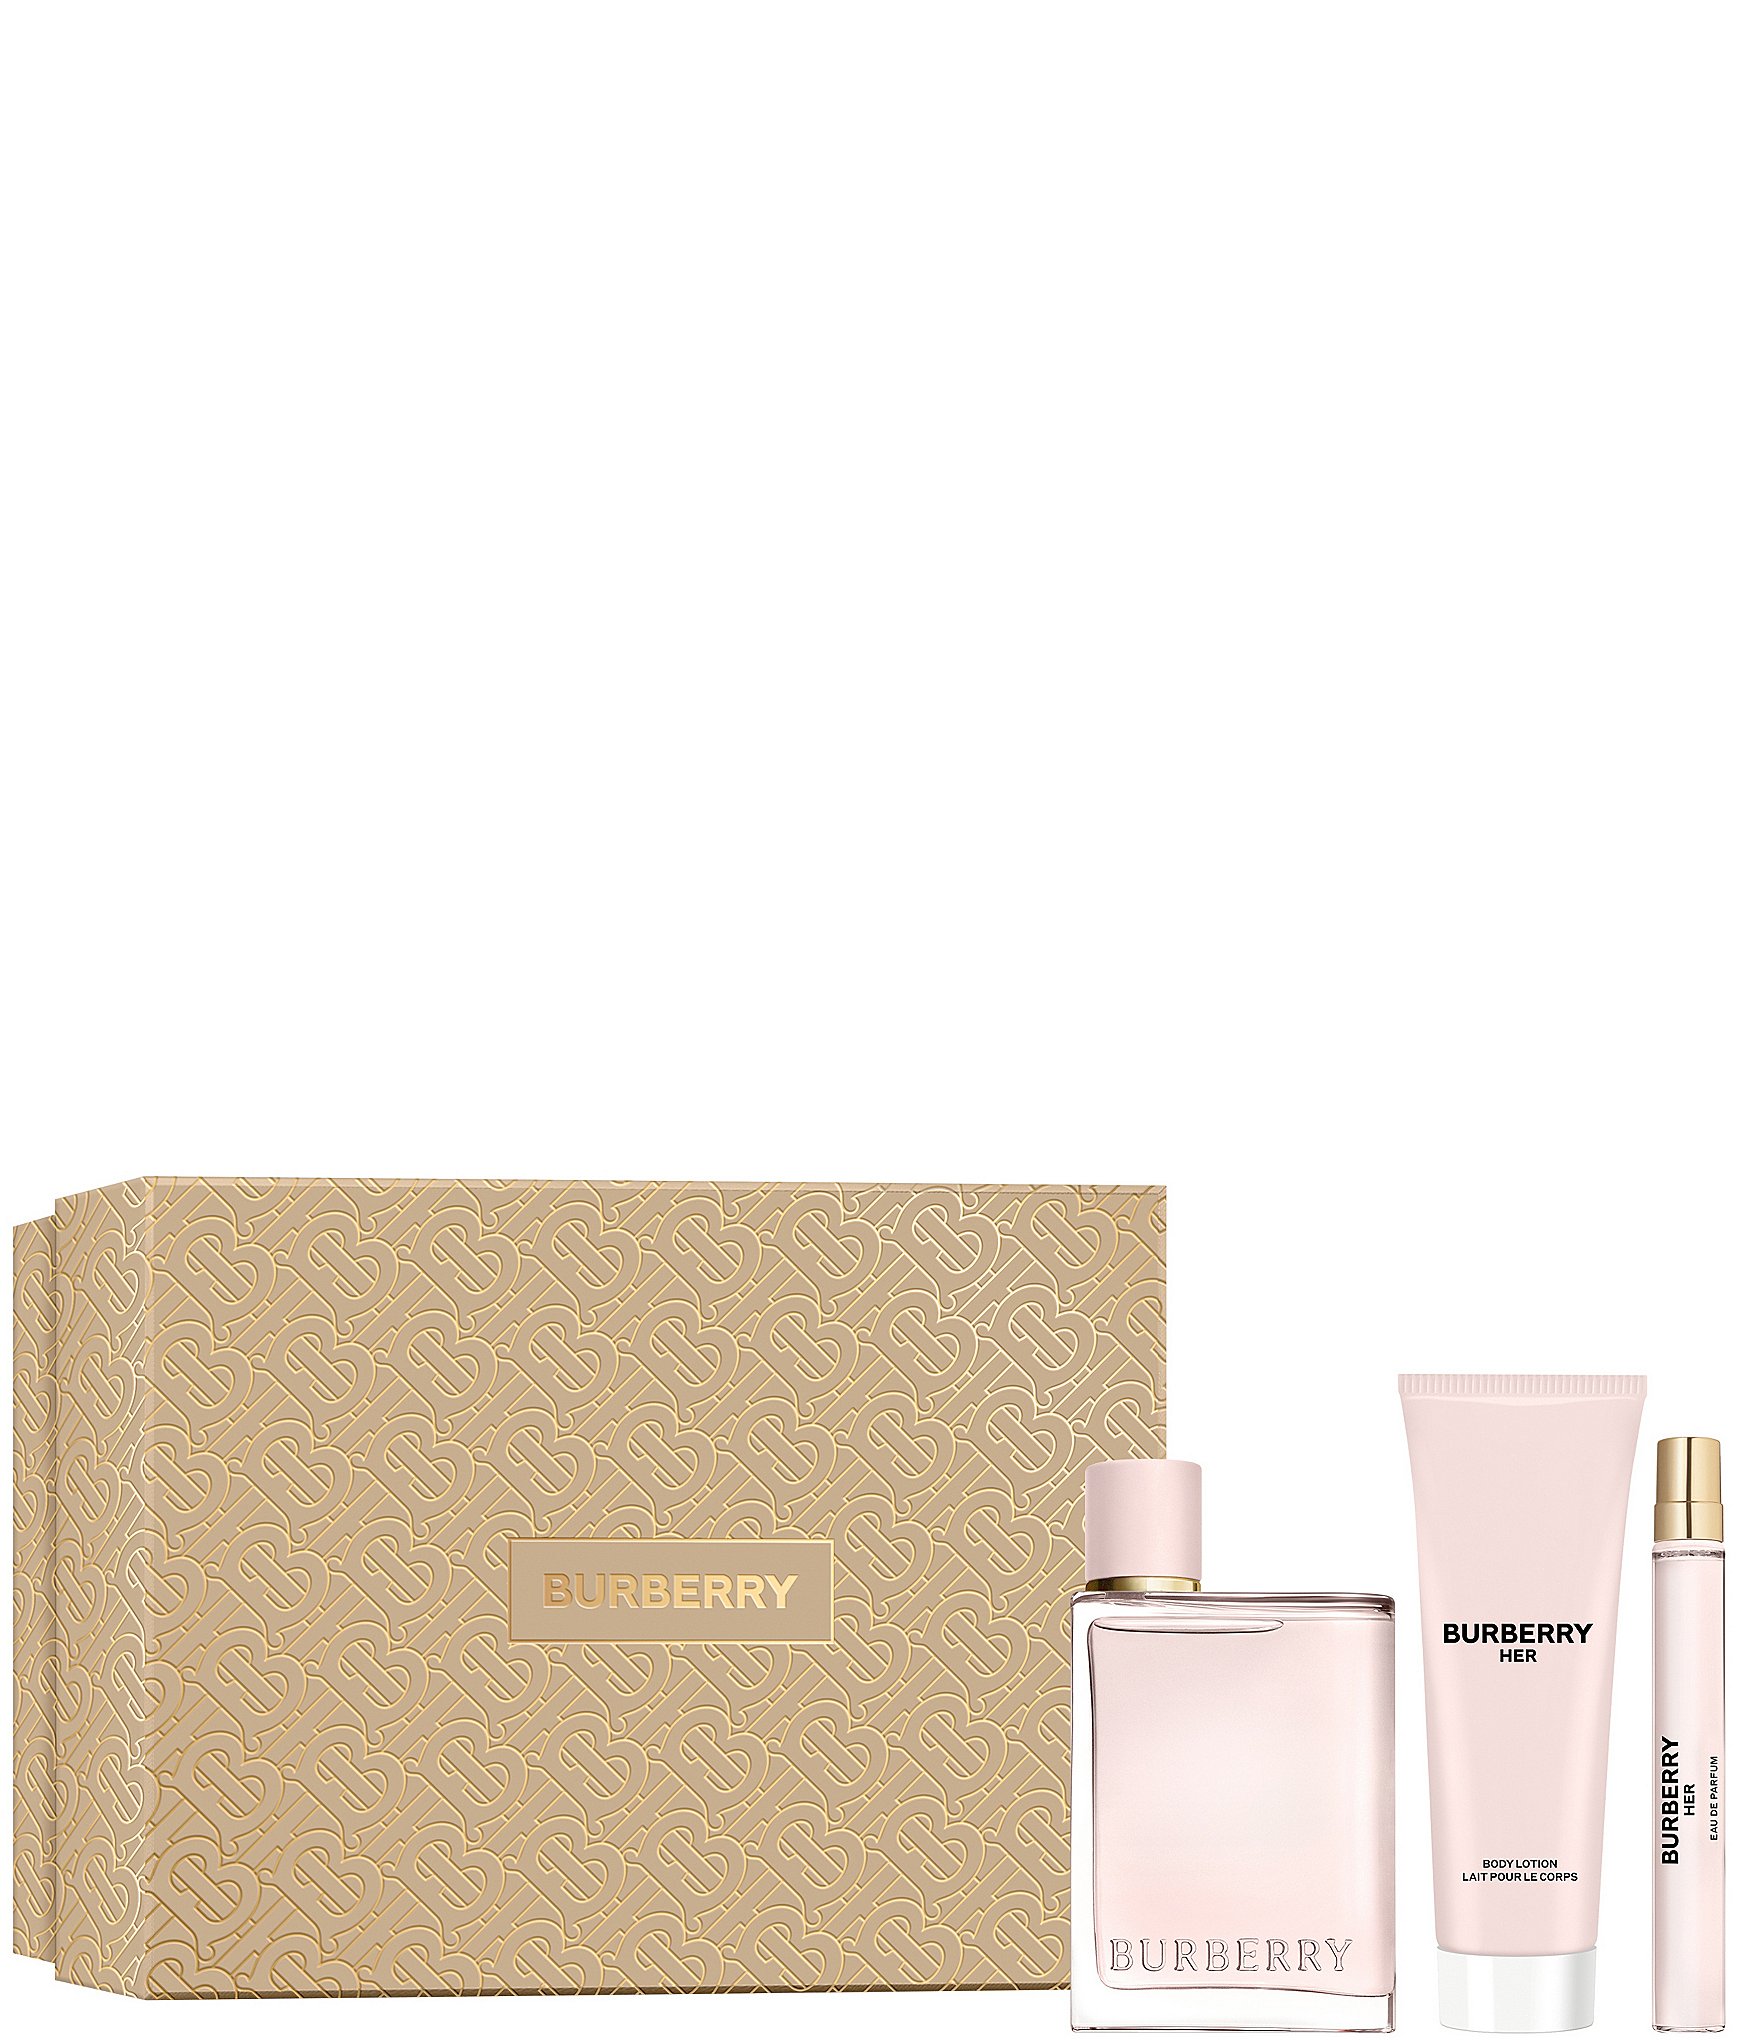 Carlton London Women's Perfume Gift Set with Necklace (Veronica) Price -  Buy Online at ₹986 in India